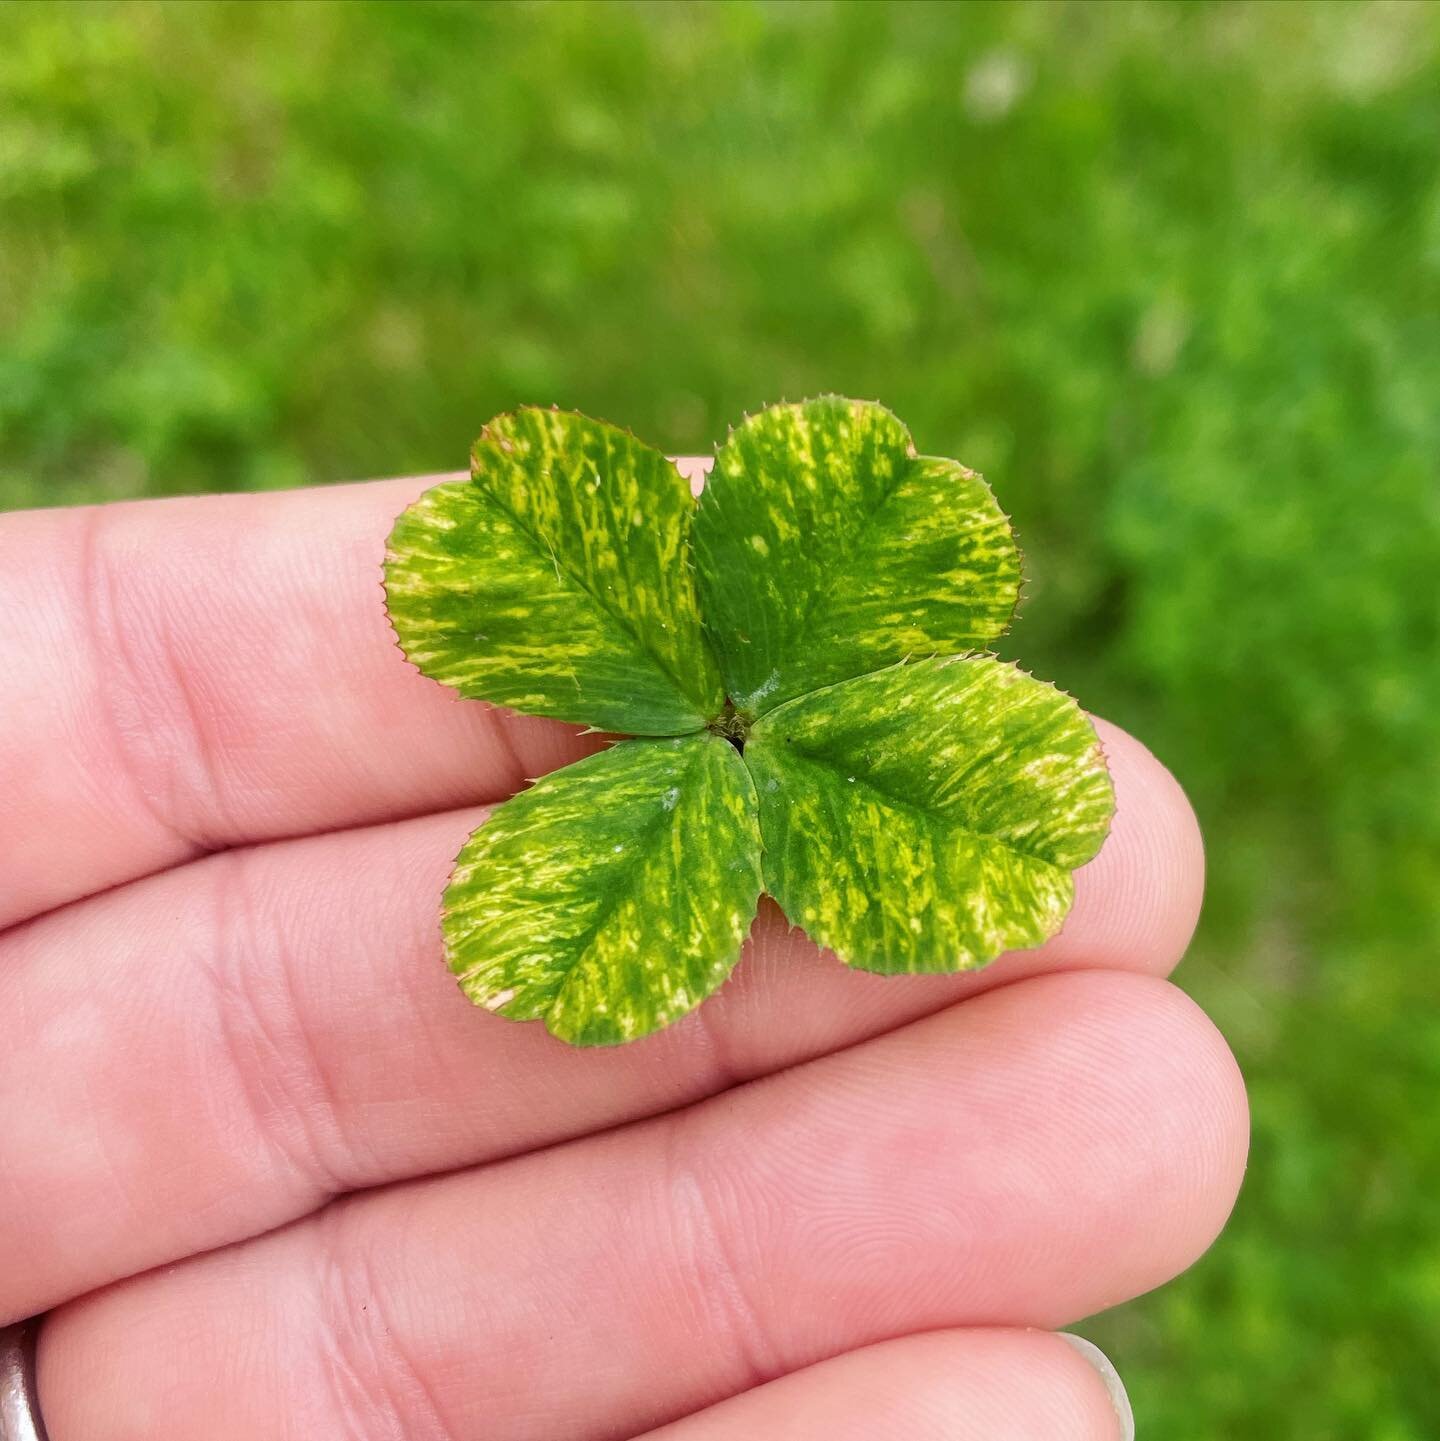 Wow, I love the colors of this clover. Never seen one like it before. 💛💚

#fourleafcloverhunter #fourleafclover